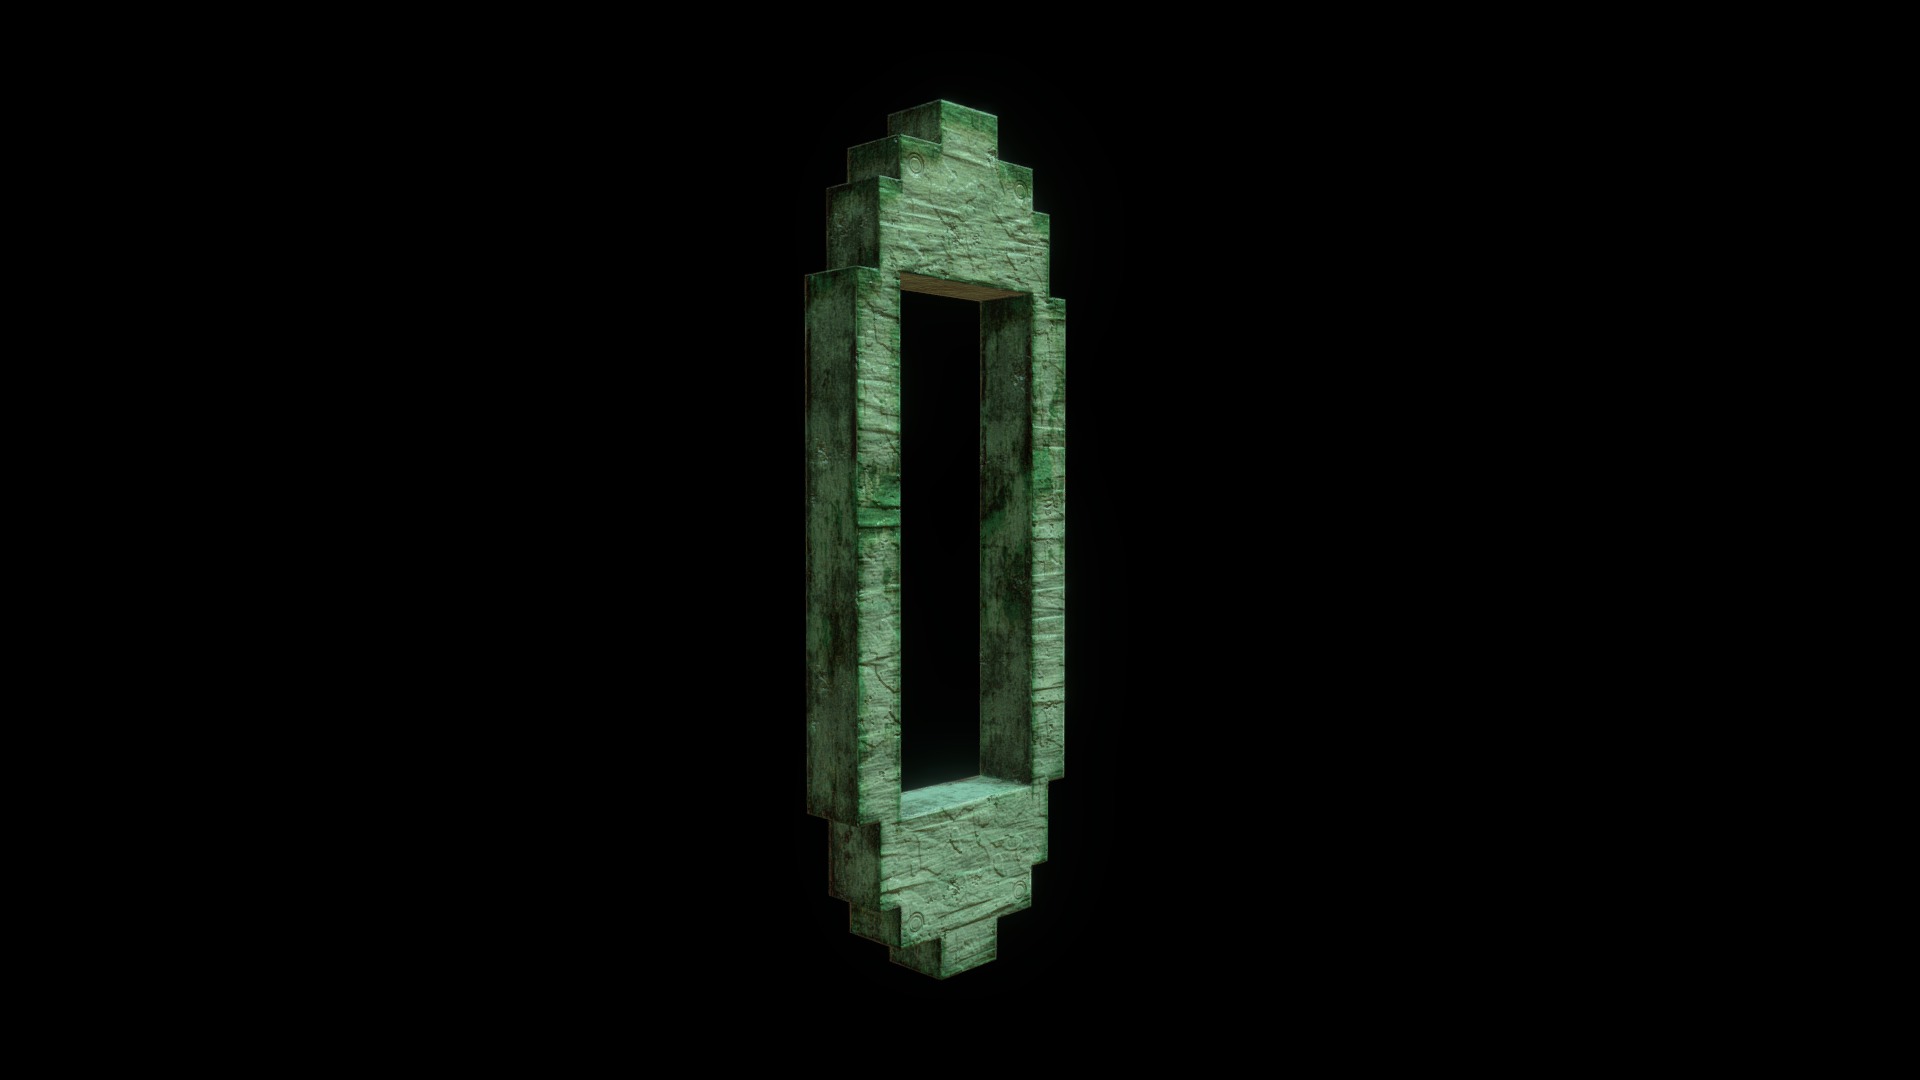 3D model O - This is a 3D model of the O. The 3D model is about a stone pillar with a window.